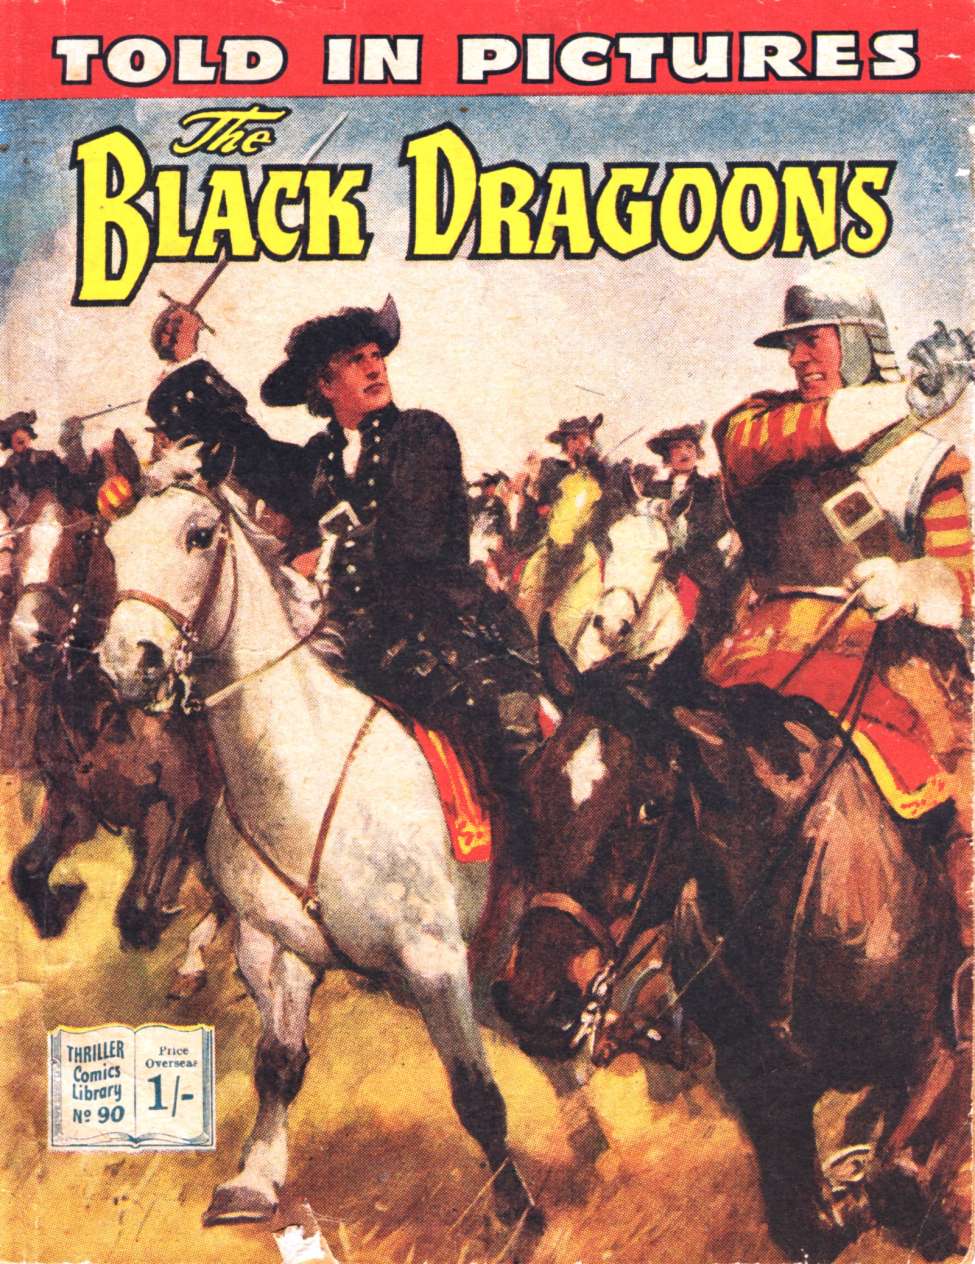 Book Cover For Thriller Comics Library 90 - The Black Dragoons